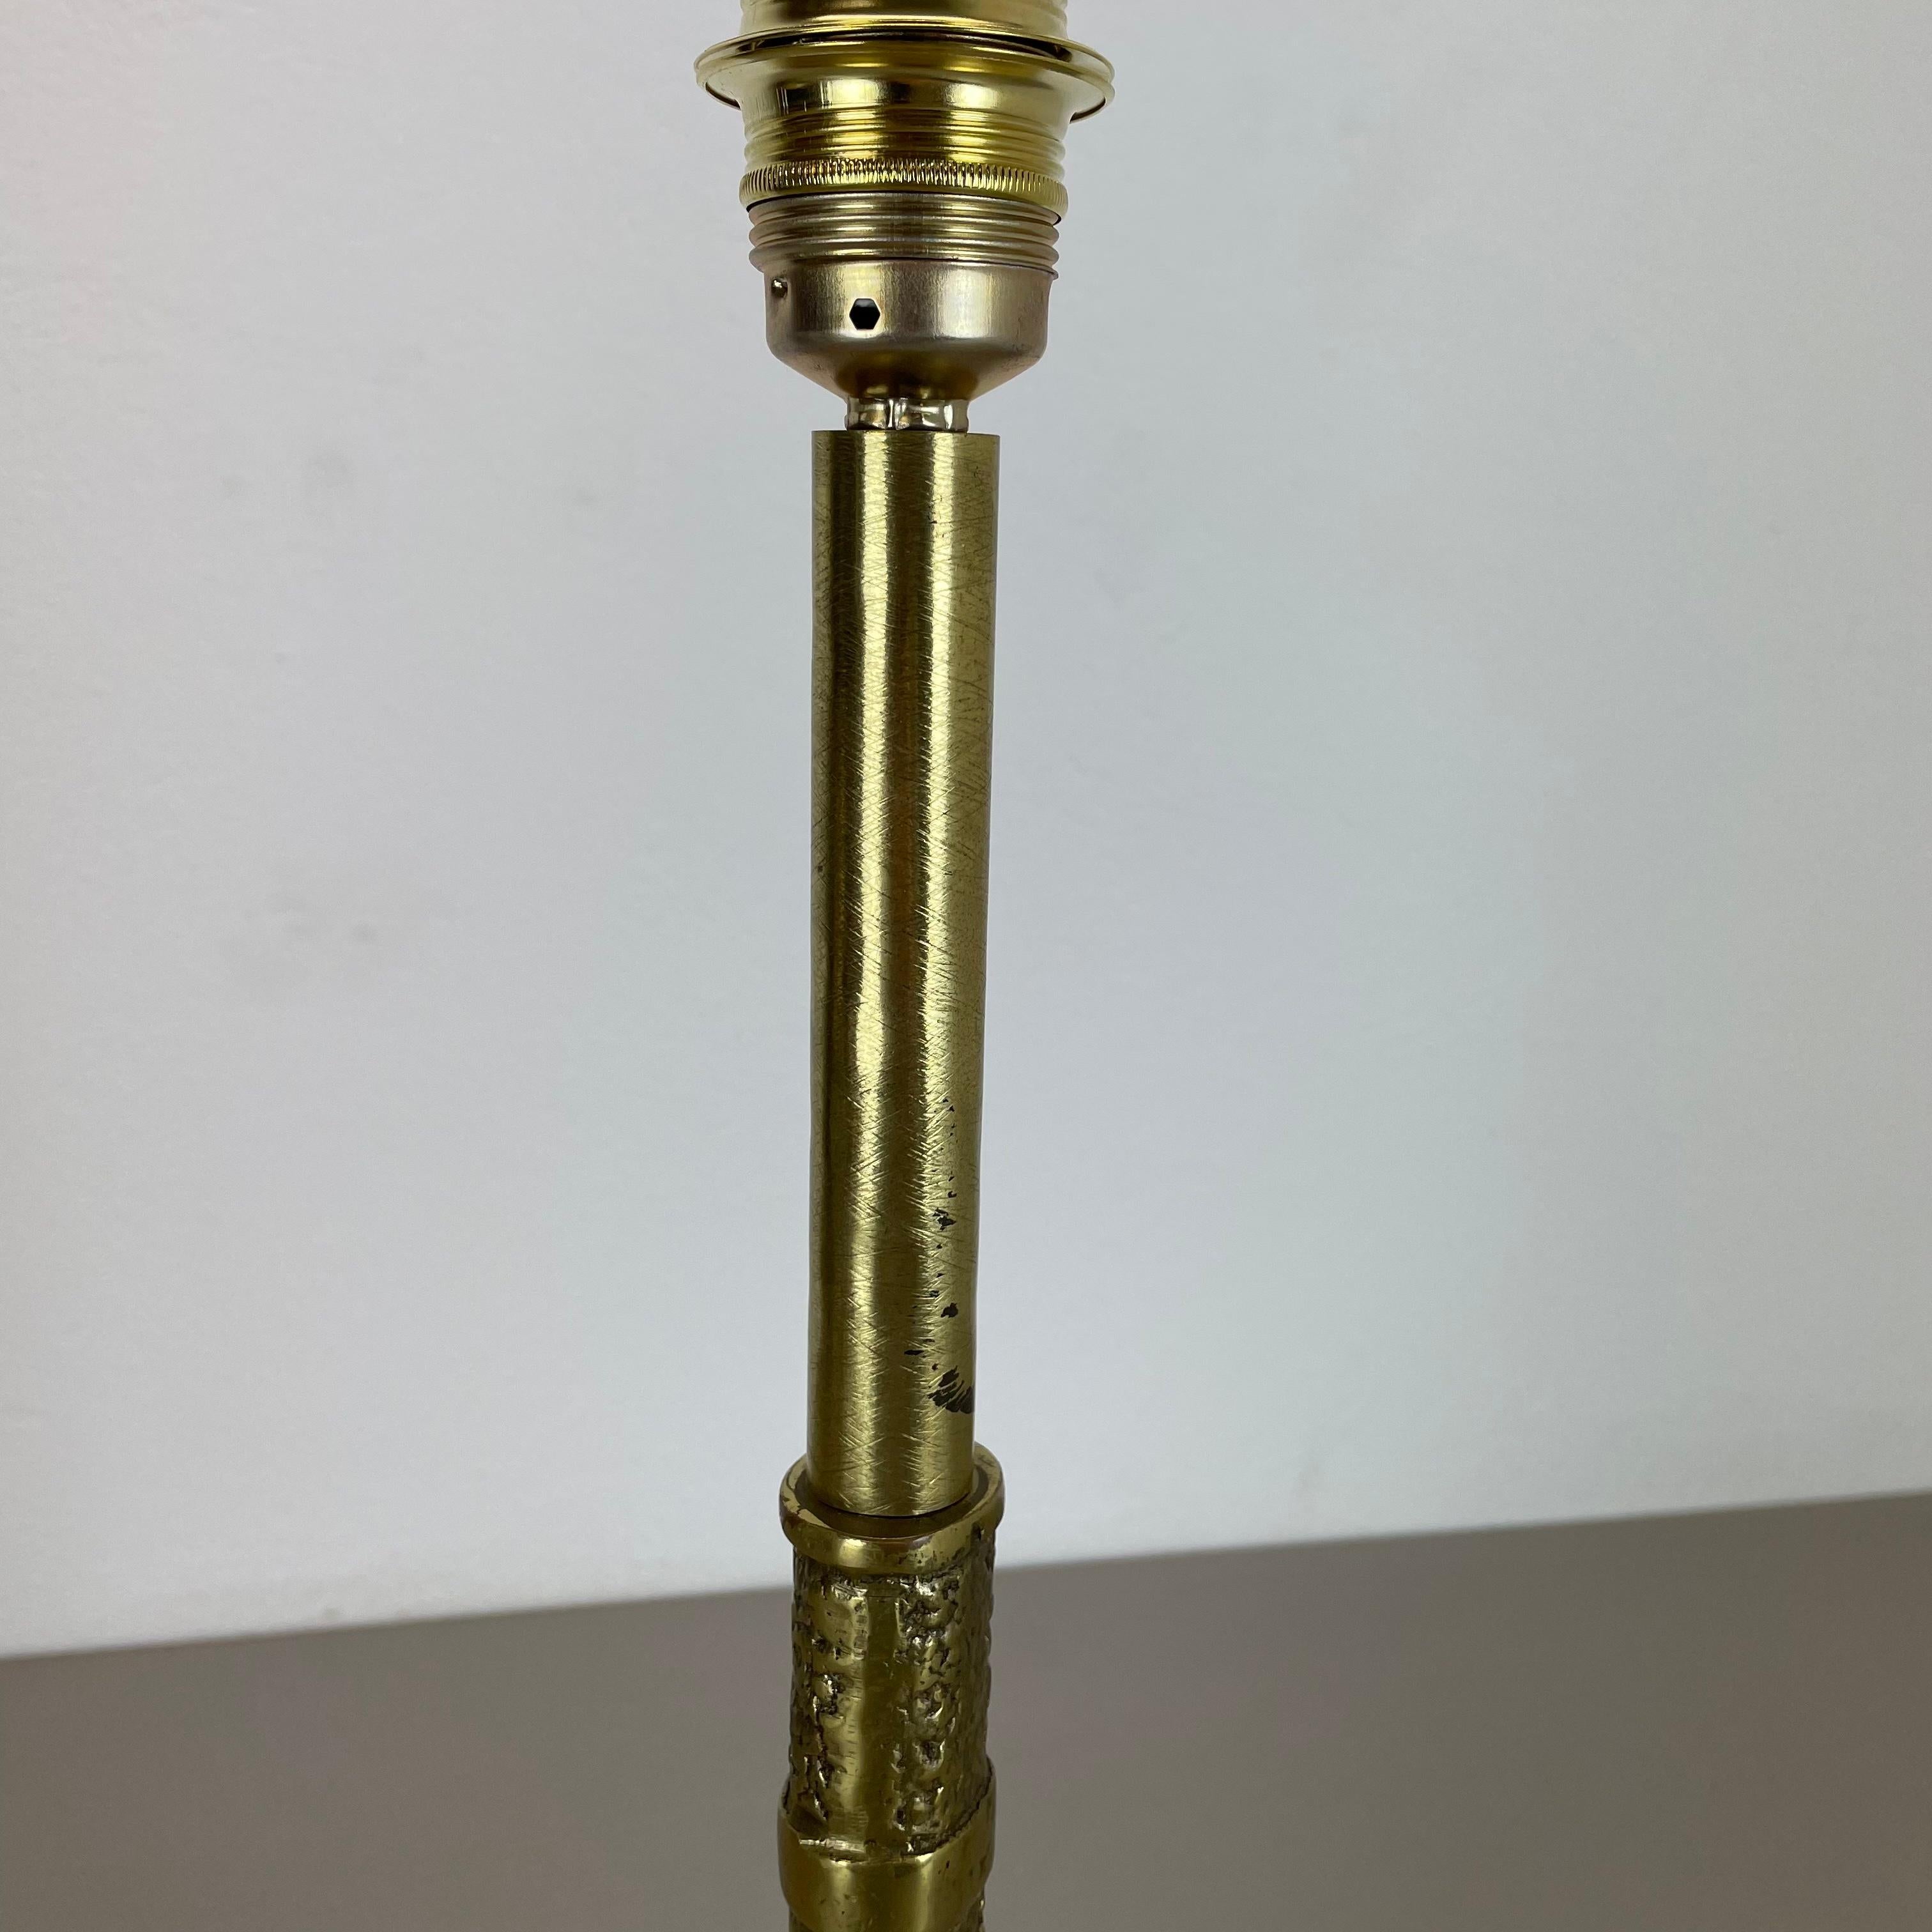 Original Hollywood Regency Style Floral Brutalist Brass Table Light, Italy 1970s For Sale 5